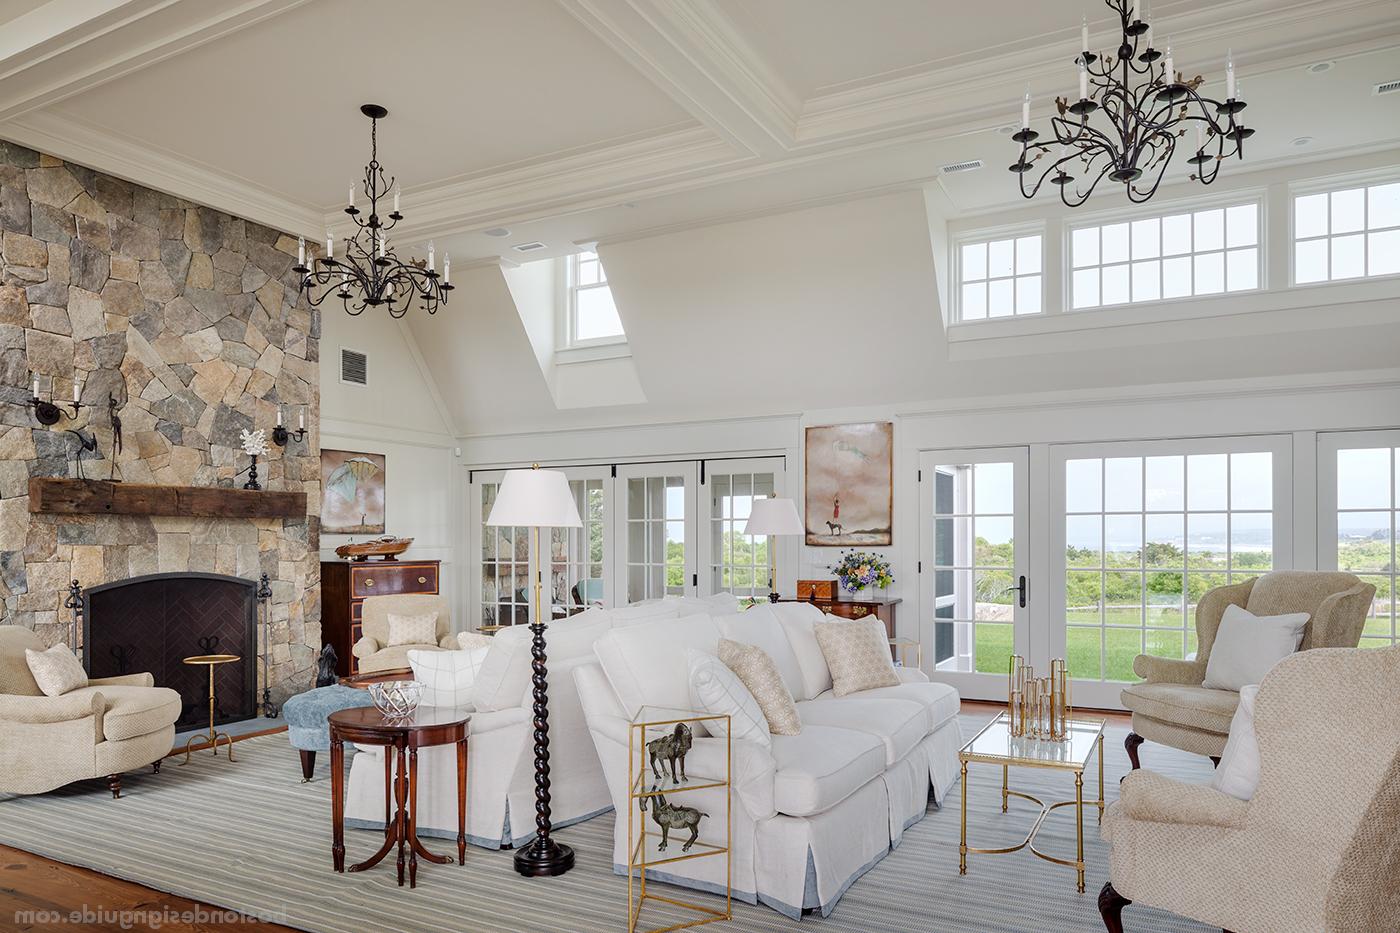 Classic great room by the water